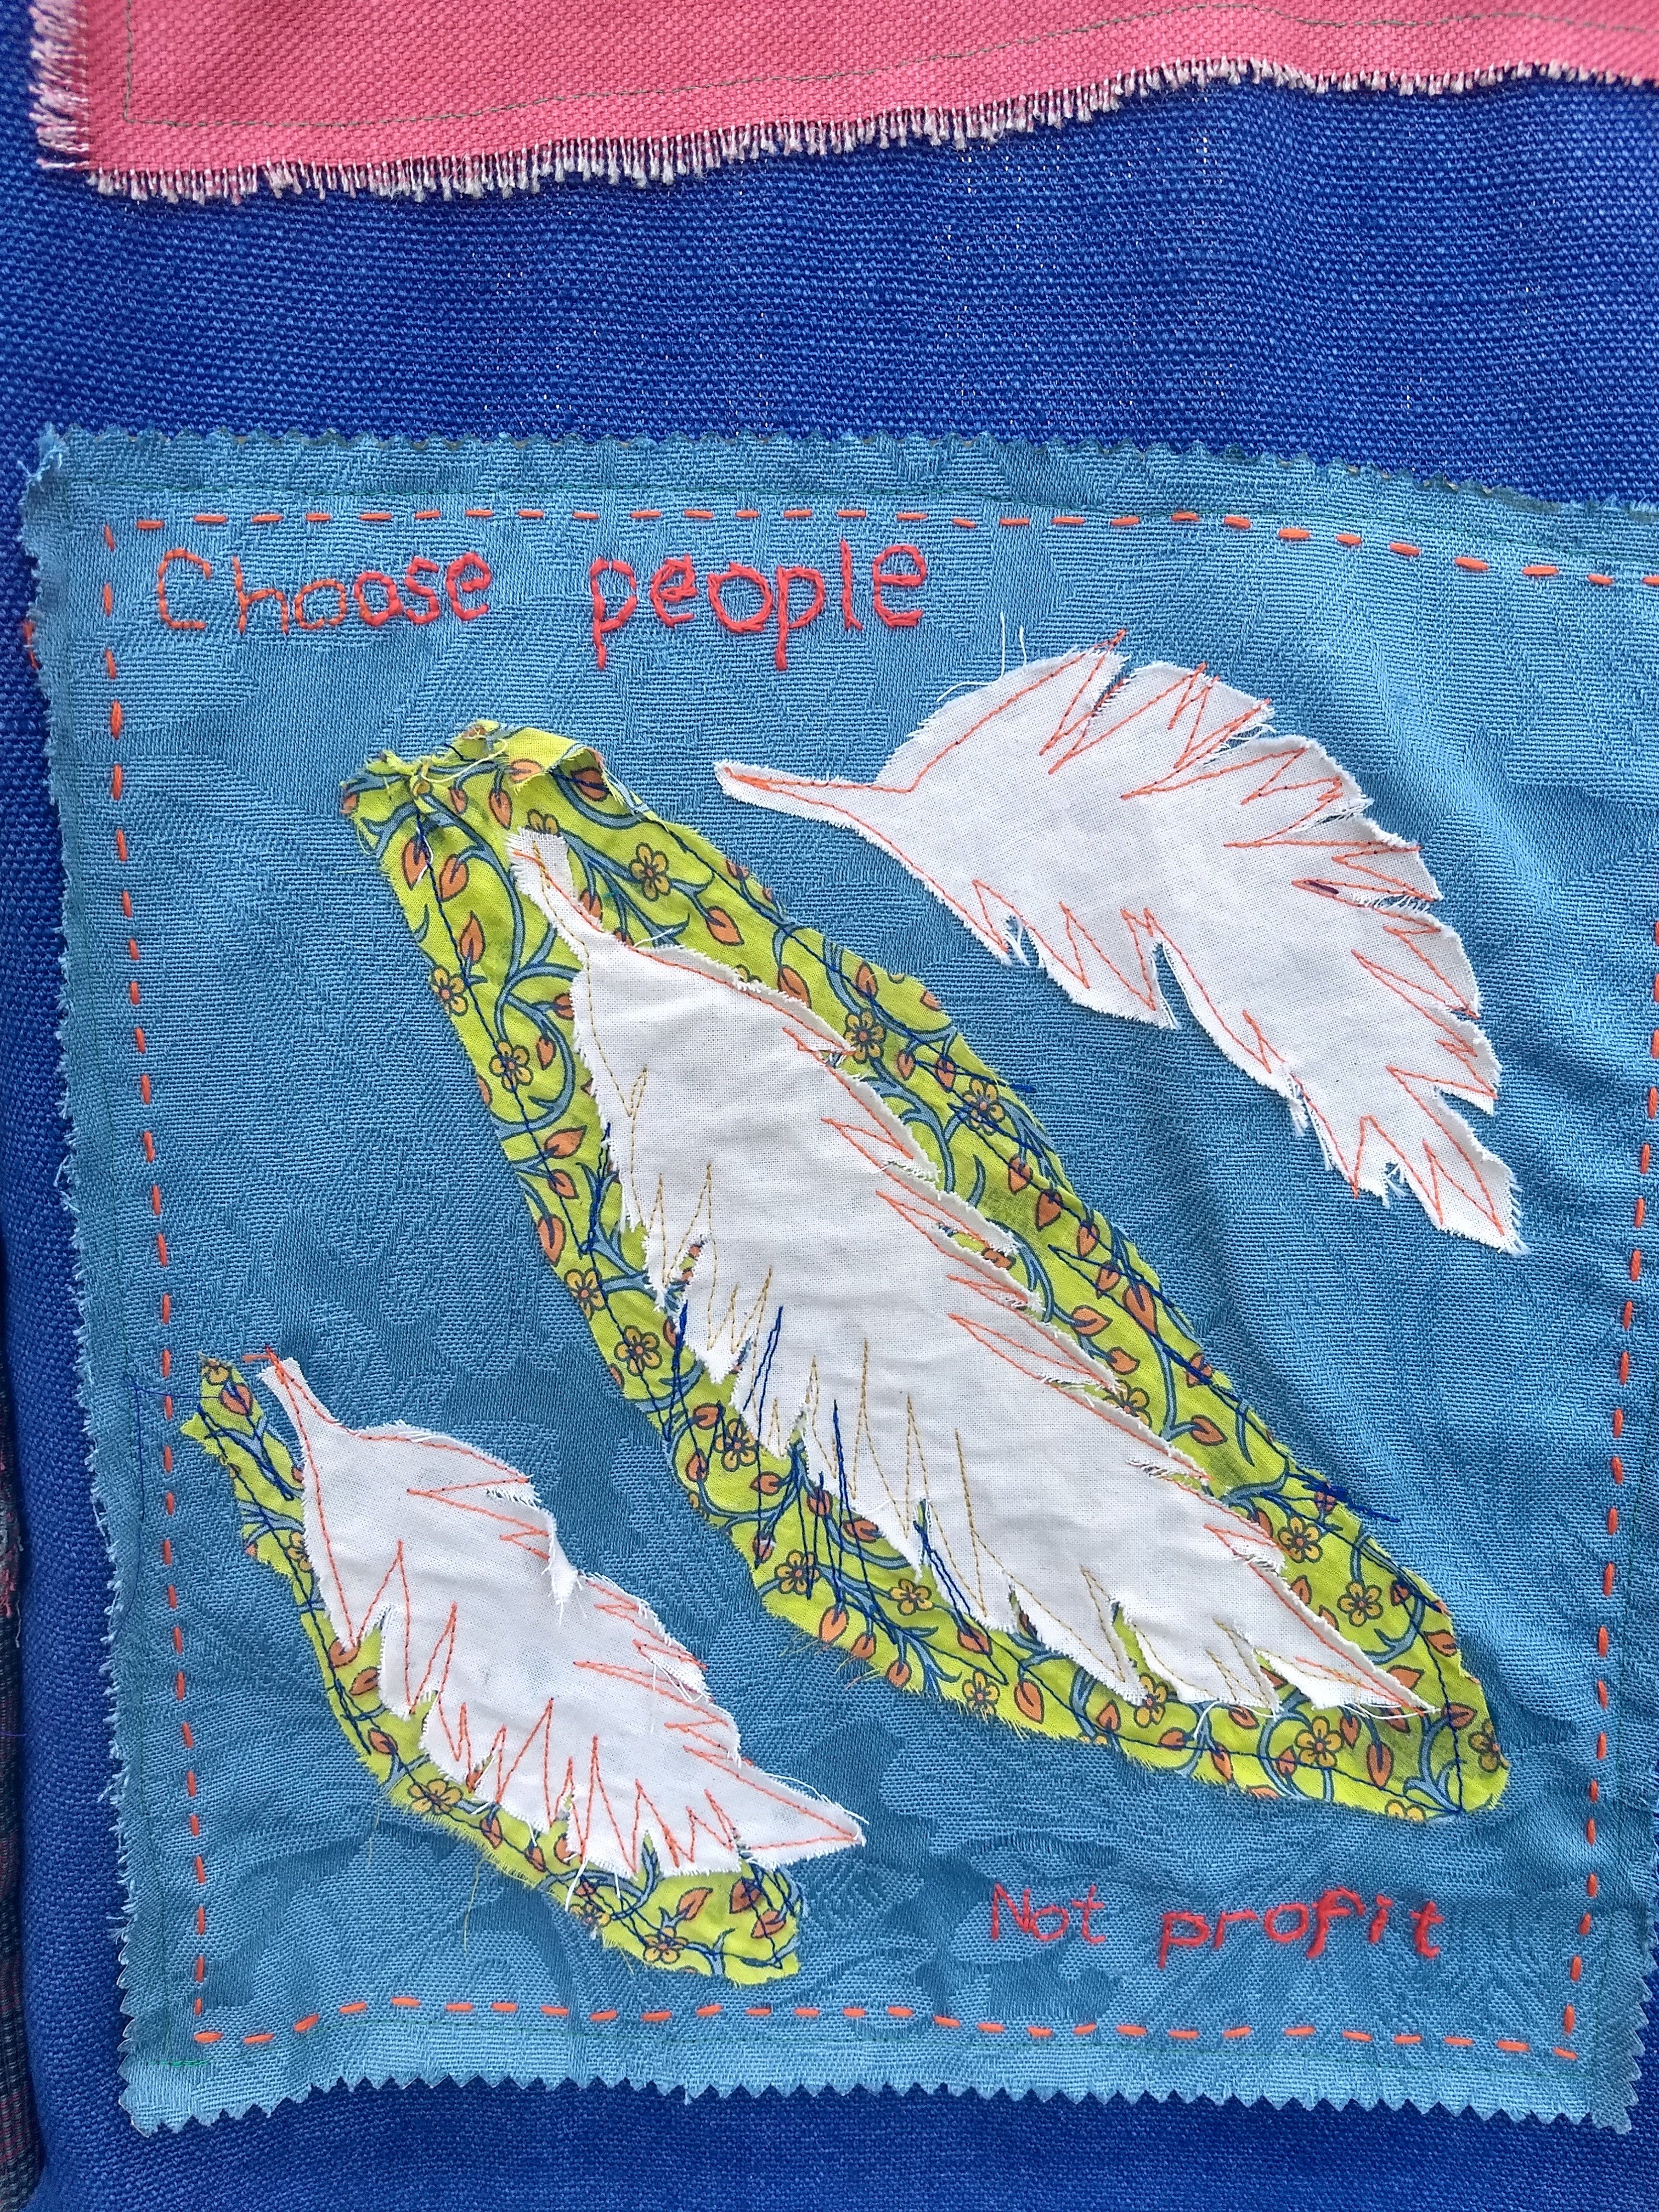 A small hand sewn banner reads 'Choose people', hung at the DSEI arms fair week of action, 2019